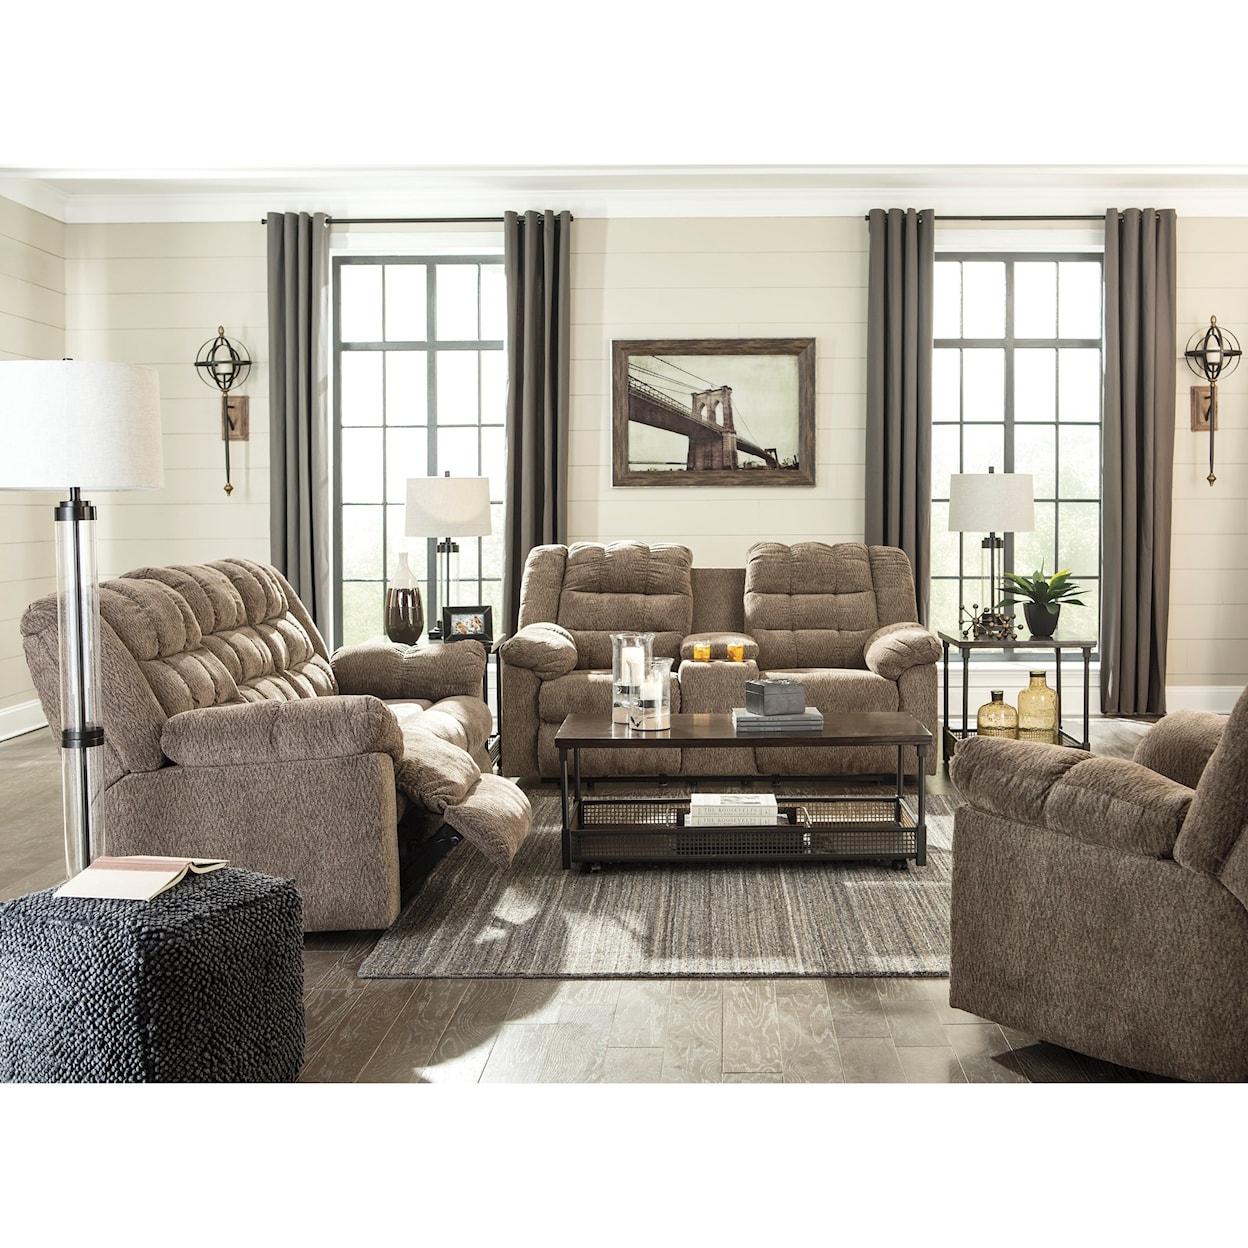 Signature Design by Ashley Furniture Workhorse Reclining Living Room Group